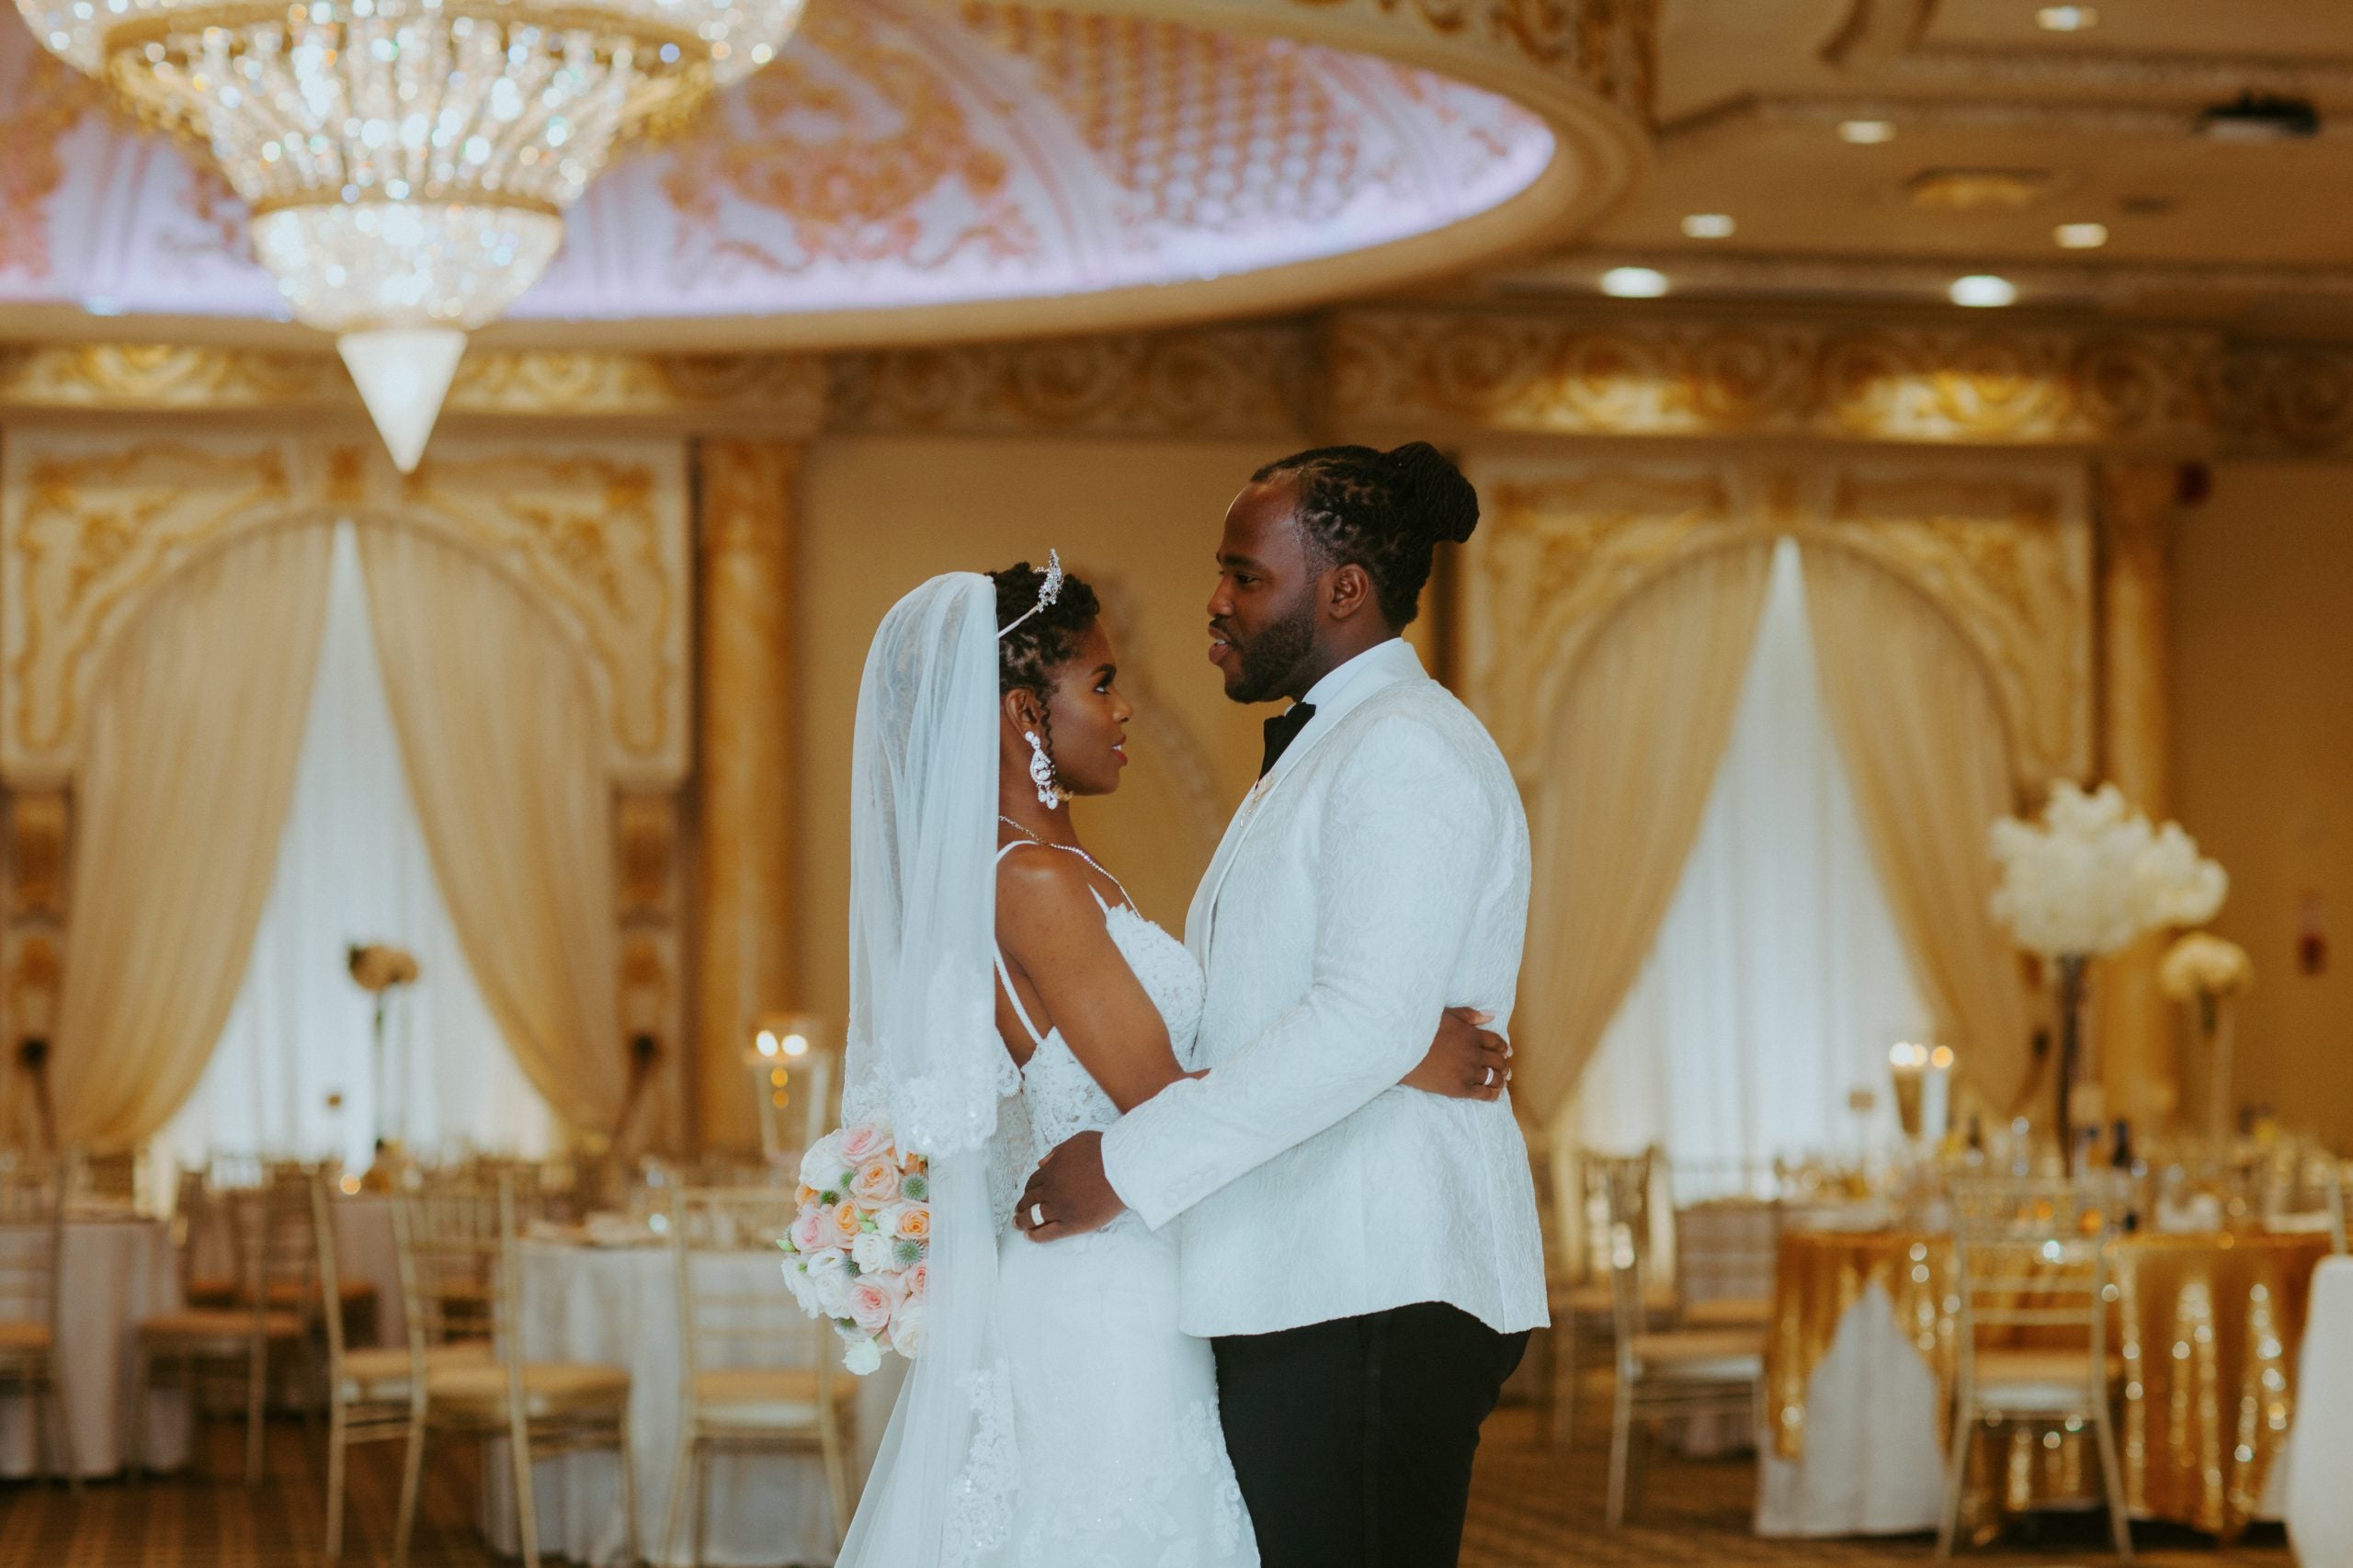 Bridal Bliss: Omega And Andrew Brought Ghanaian Pride To Their Royal Themed Wedding